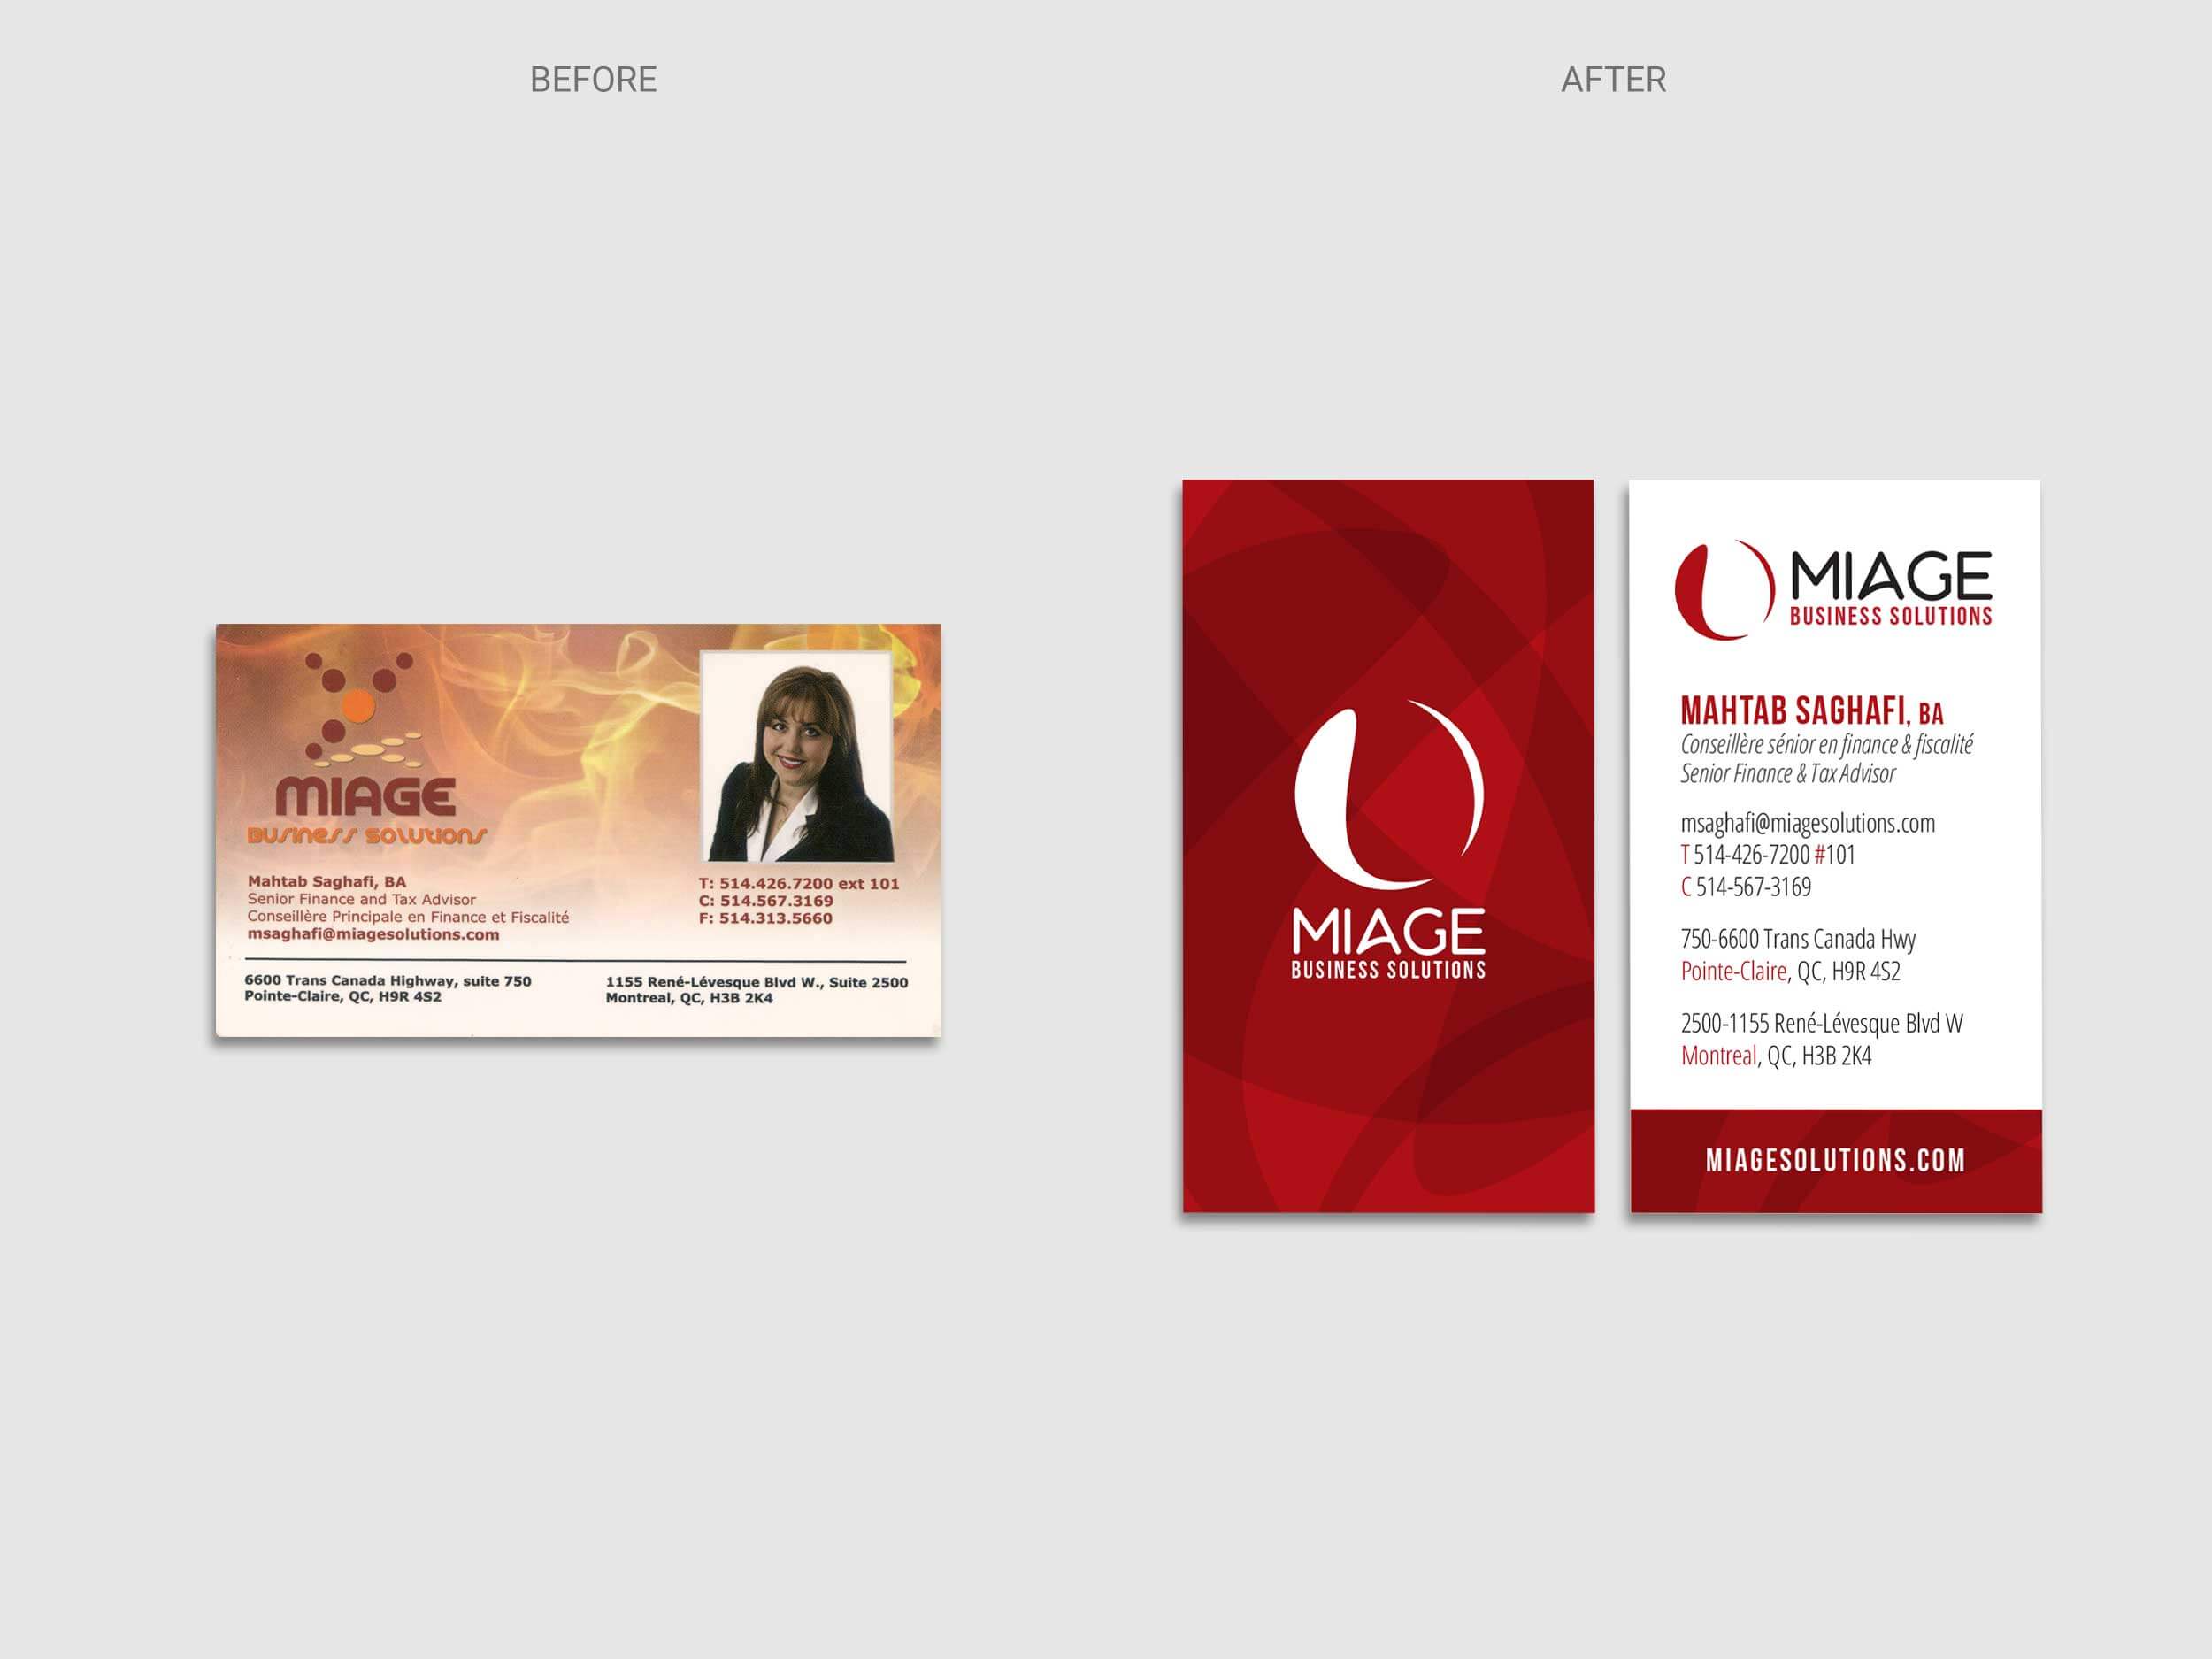 Miage – Business Card – Before & After